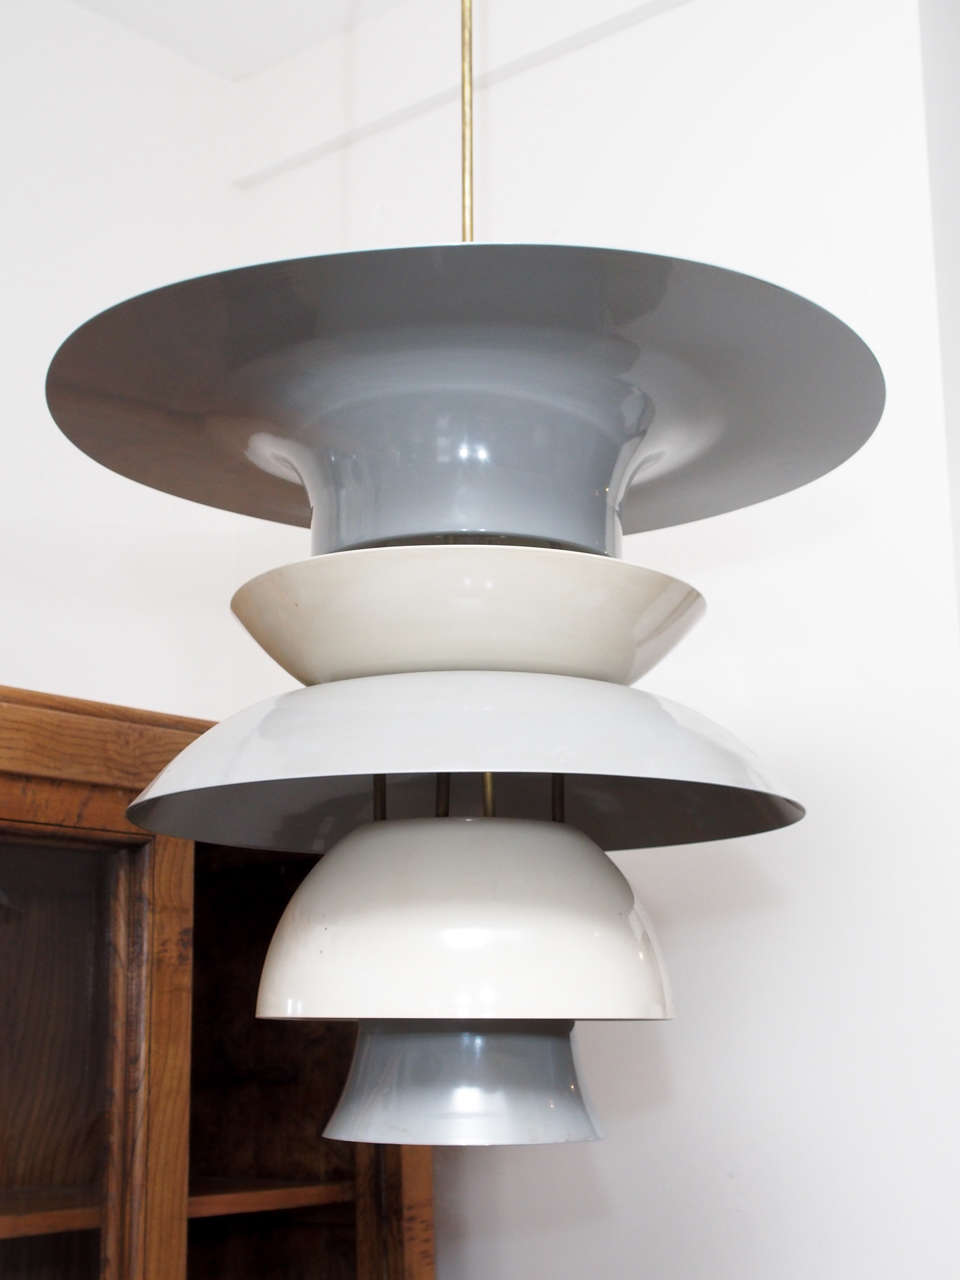 Two single-light pendants in spun metal lacquered gray and ivory; brass mounts;
Measurements are for fixture only; brass stem adds 32